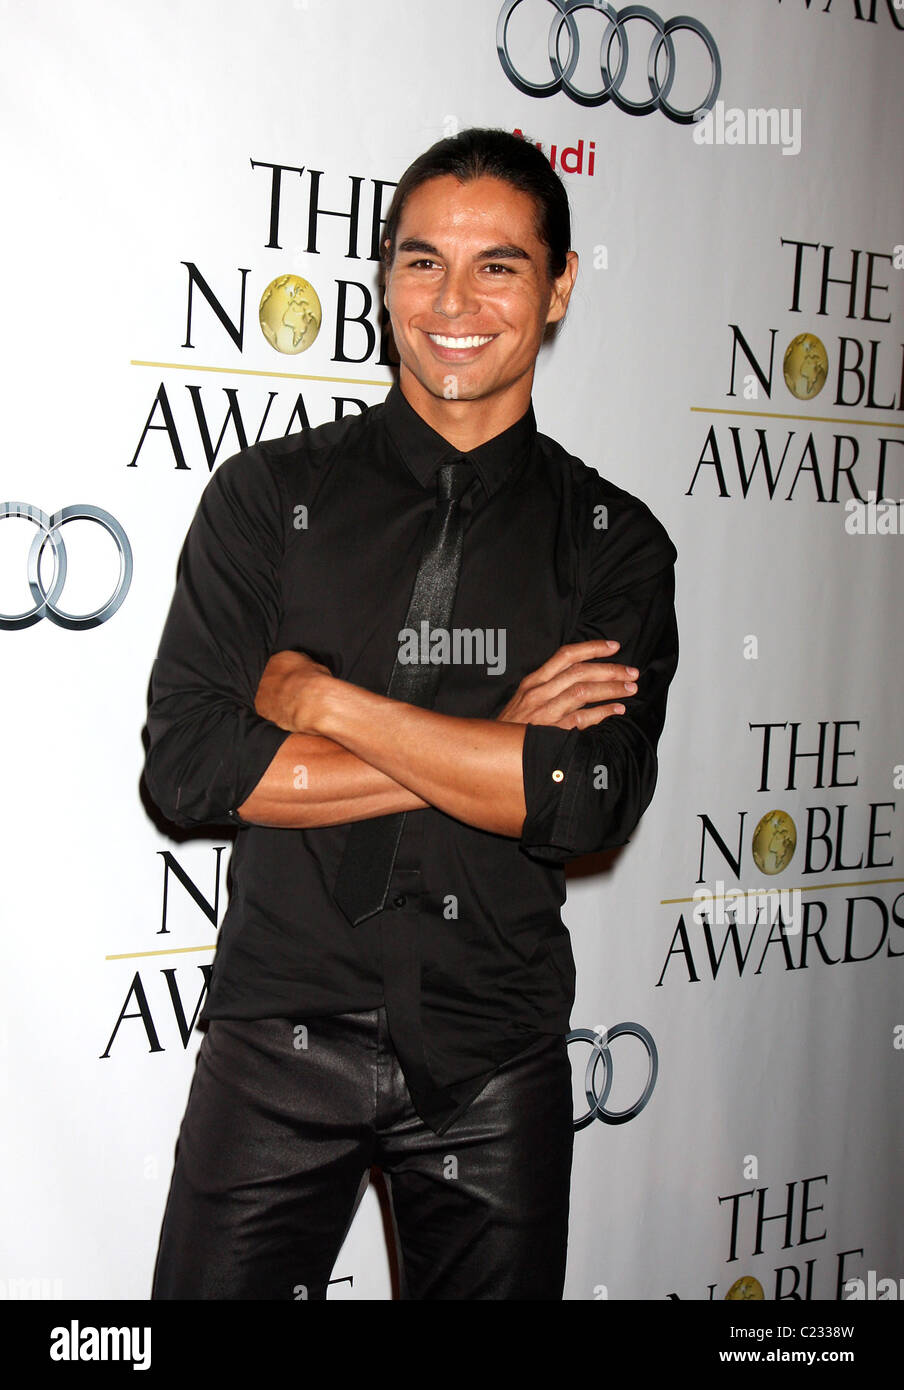 Julio Iglesias Jr The noble Awards held at the Beverly Hills Hilton Beverly Hills, California, USA - 18.10.09 Nikki Nelson / Stock Photo